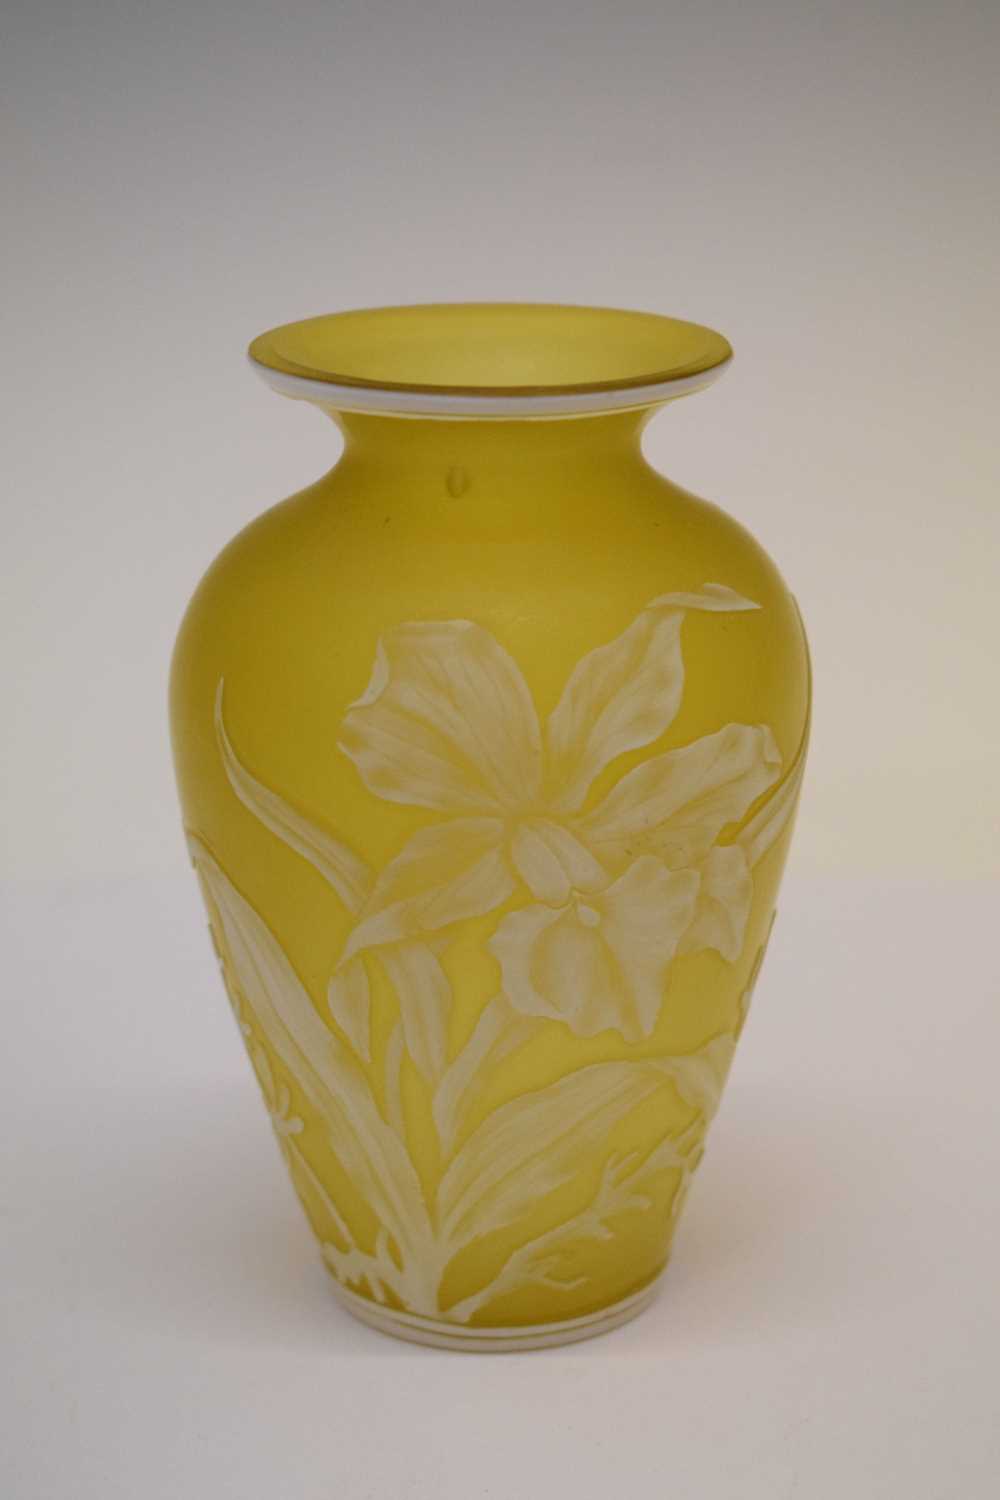 Galle style cameo glass vase with floral decoration